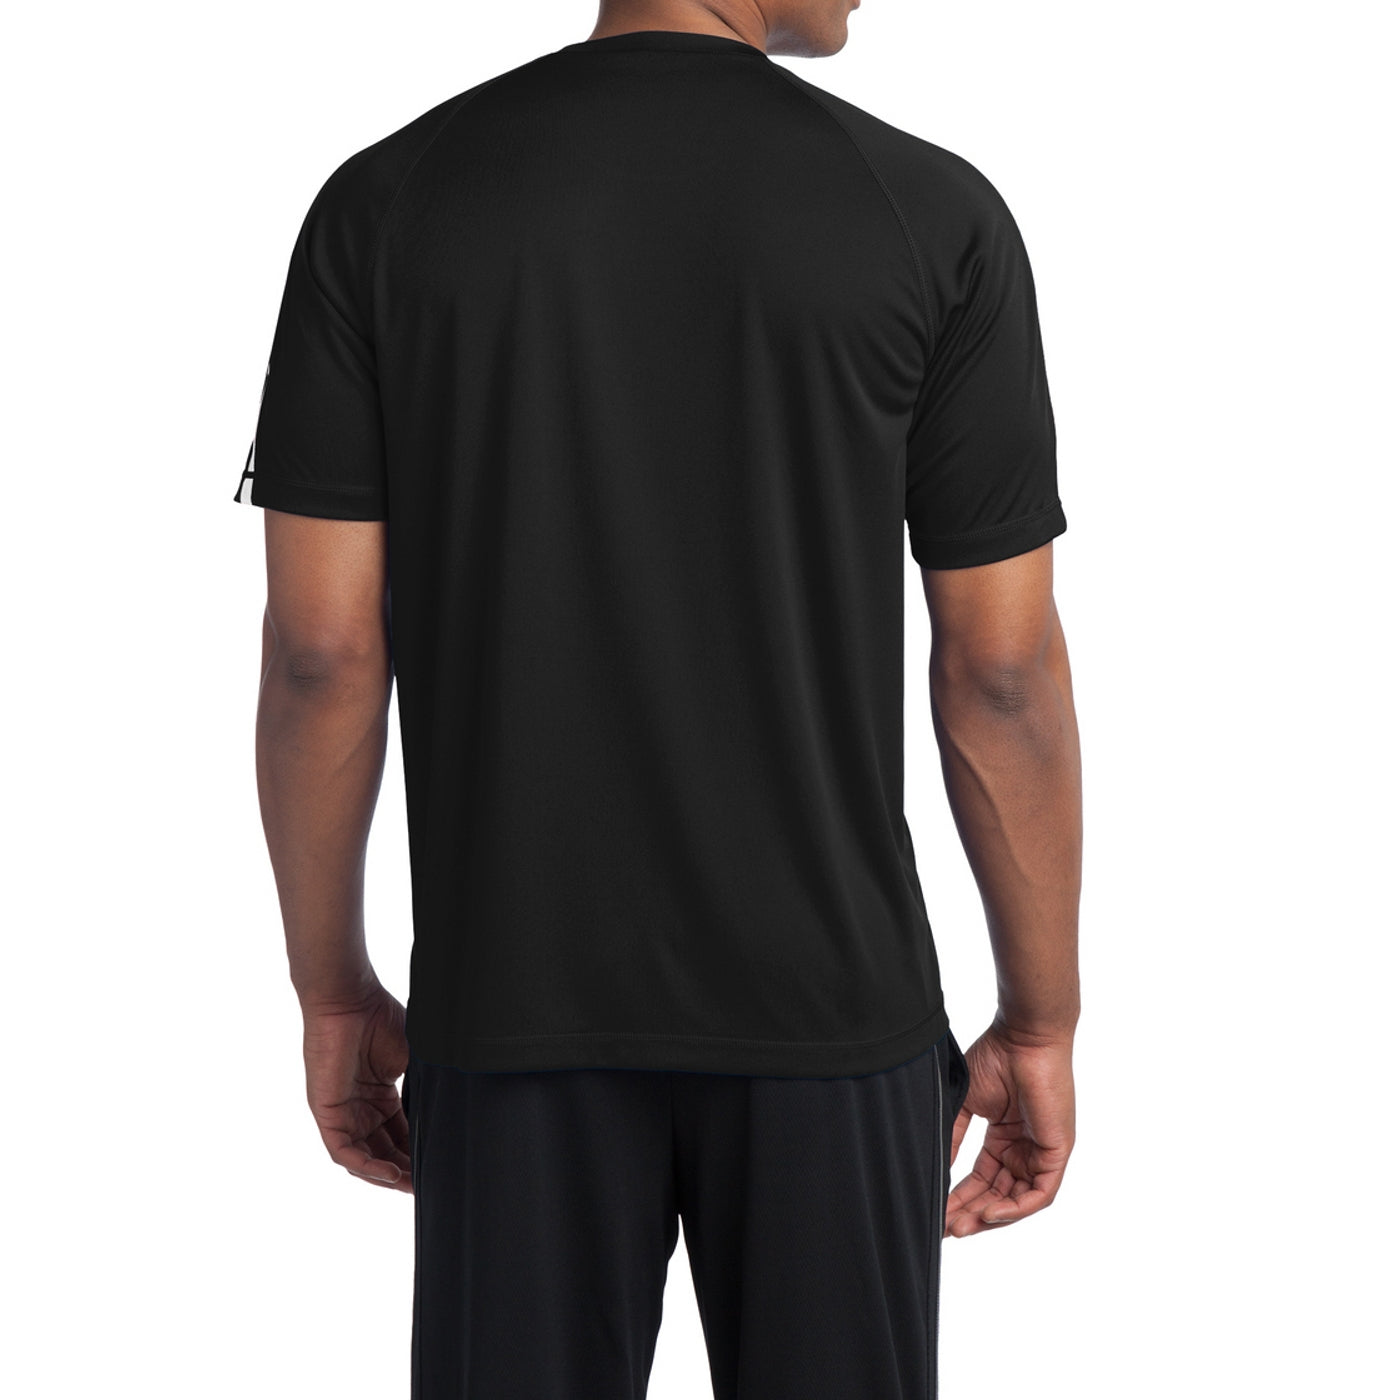 Men's Colorblock PosiCharge Competitor Tee - Black/ True Red